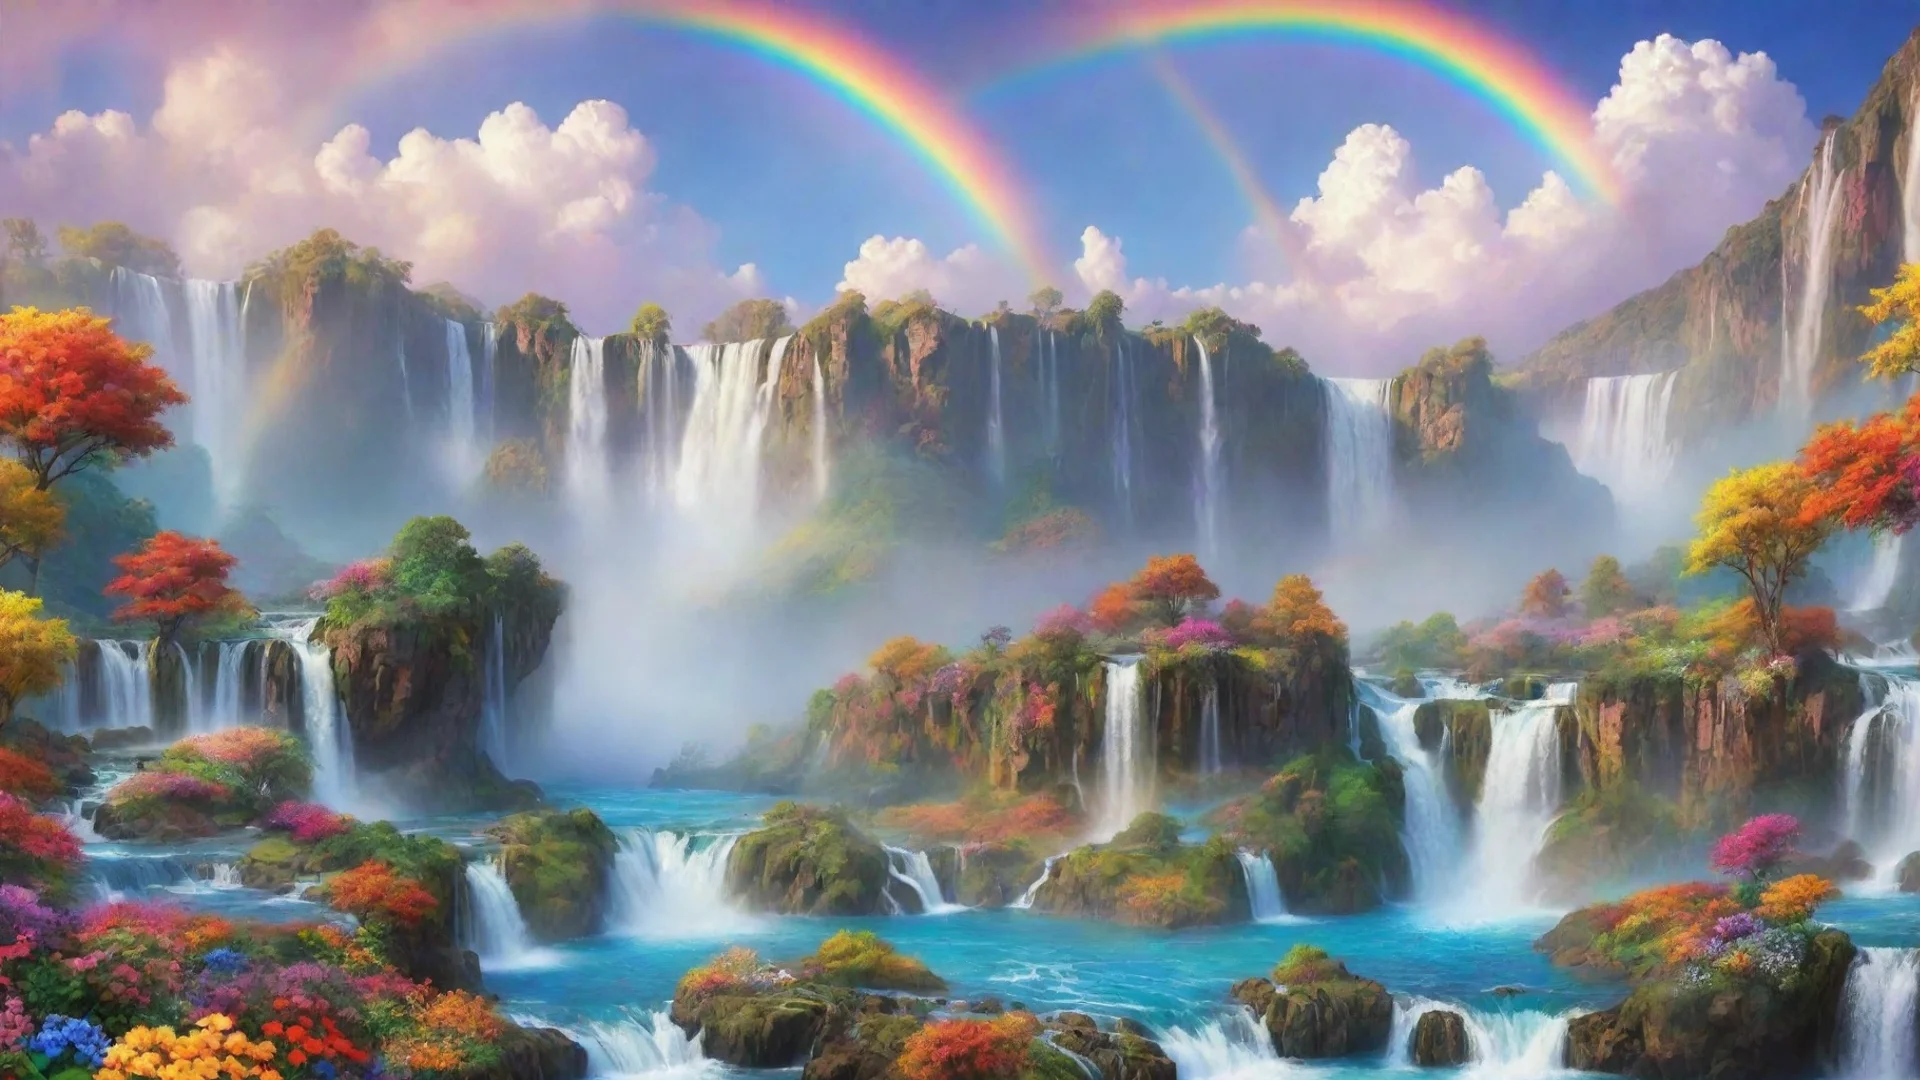 aiartstation art dreamy colorful landscape alian world amazing beautiful utopian colors flowers waterfalls rainbows clouds confident engaging wow 3 wide